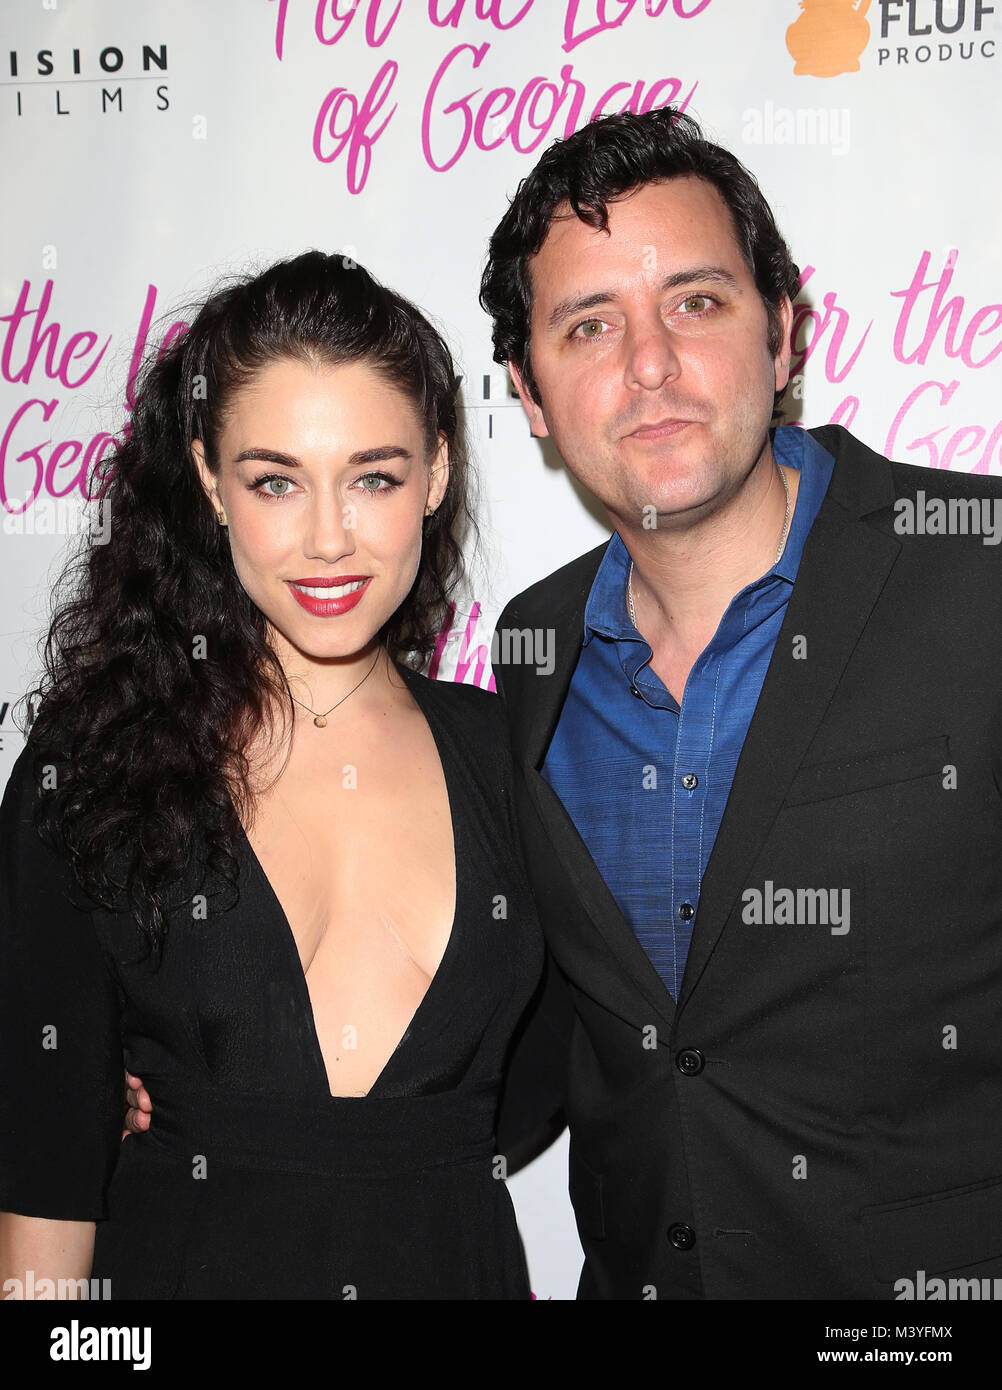 Hollywood, Ca. 12th Feb, 2018. Jade Tailor, Ben Gleib, at Premiere Of  Vision Films' 'For The Love Of George' at TCL Chinese 6 Theatres in  Hollywood, California on February 12, 2018. Credit: